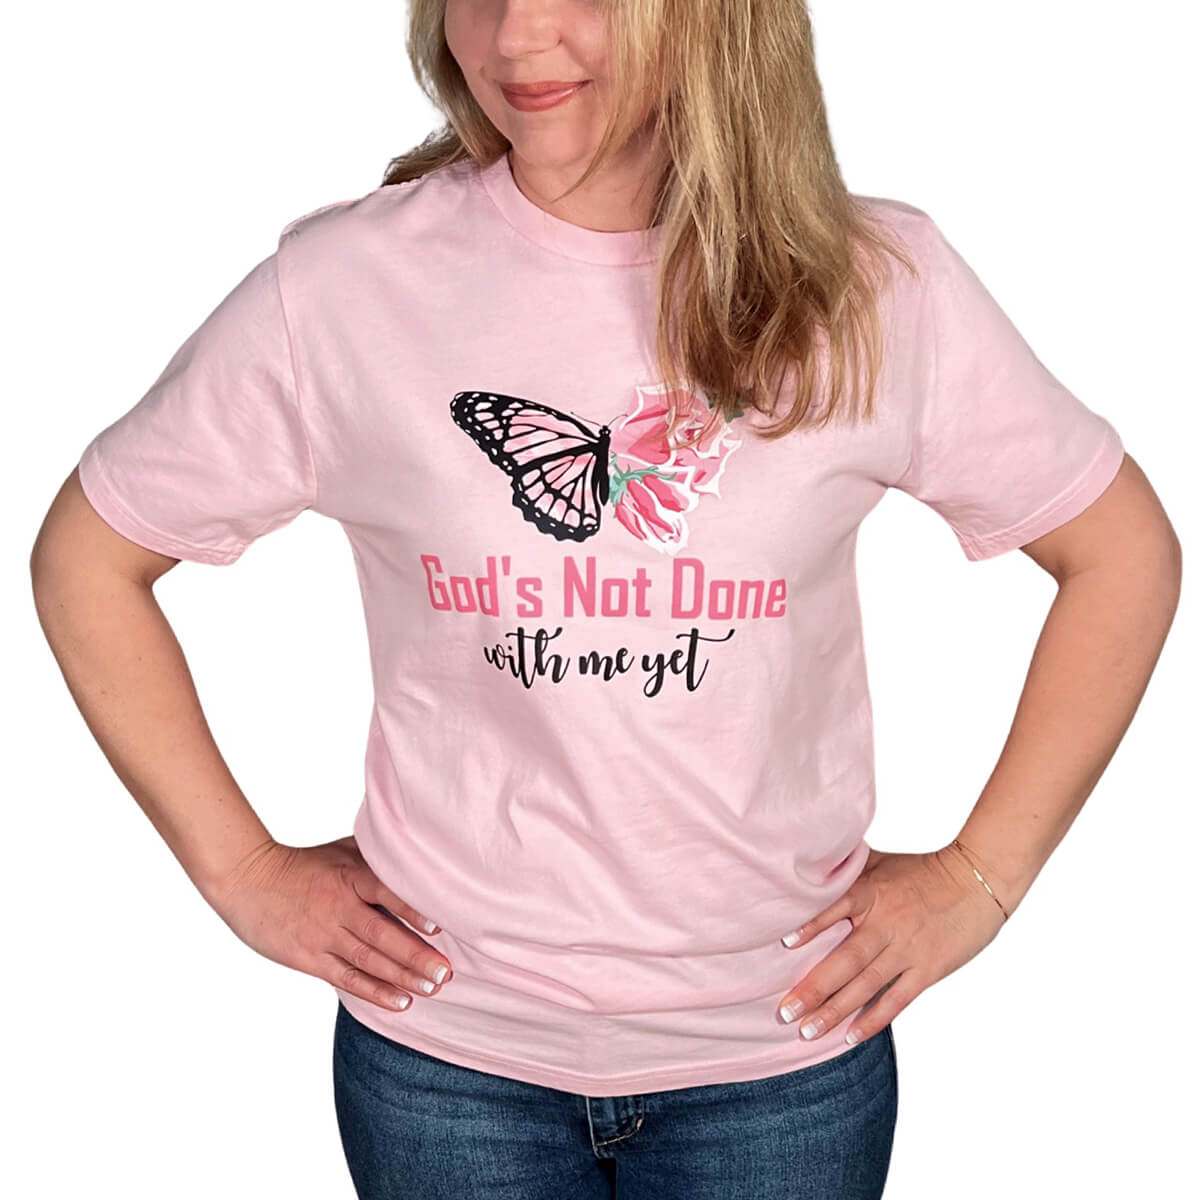 God's Not Done With Me Yet T-Shirt